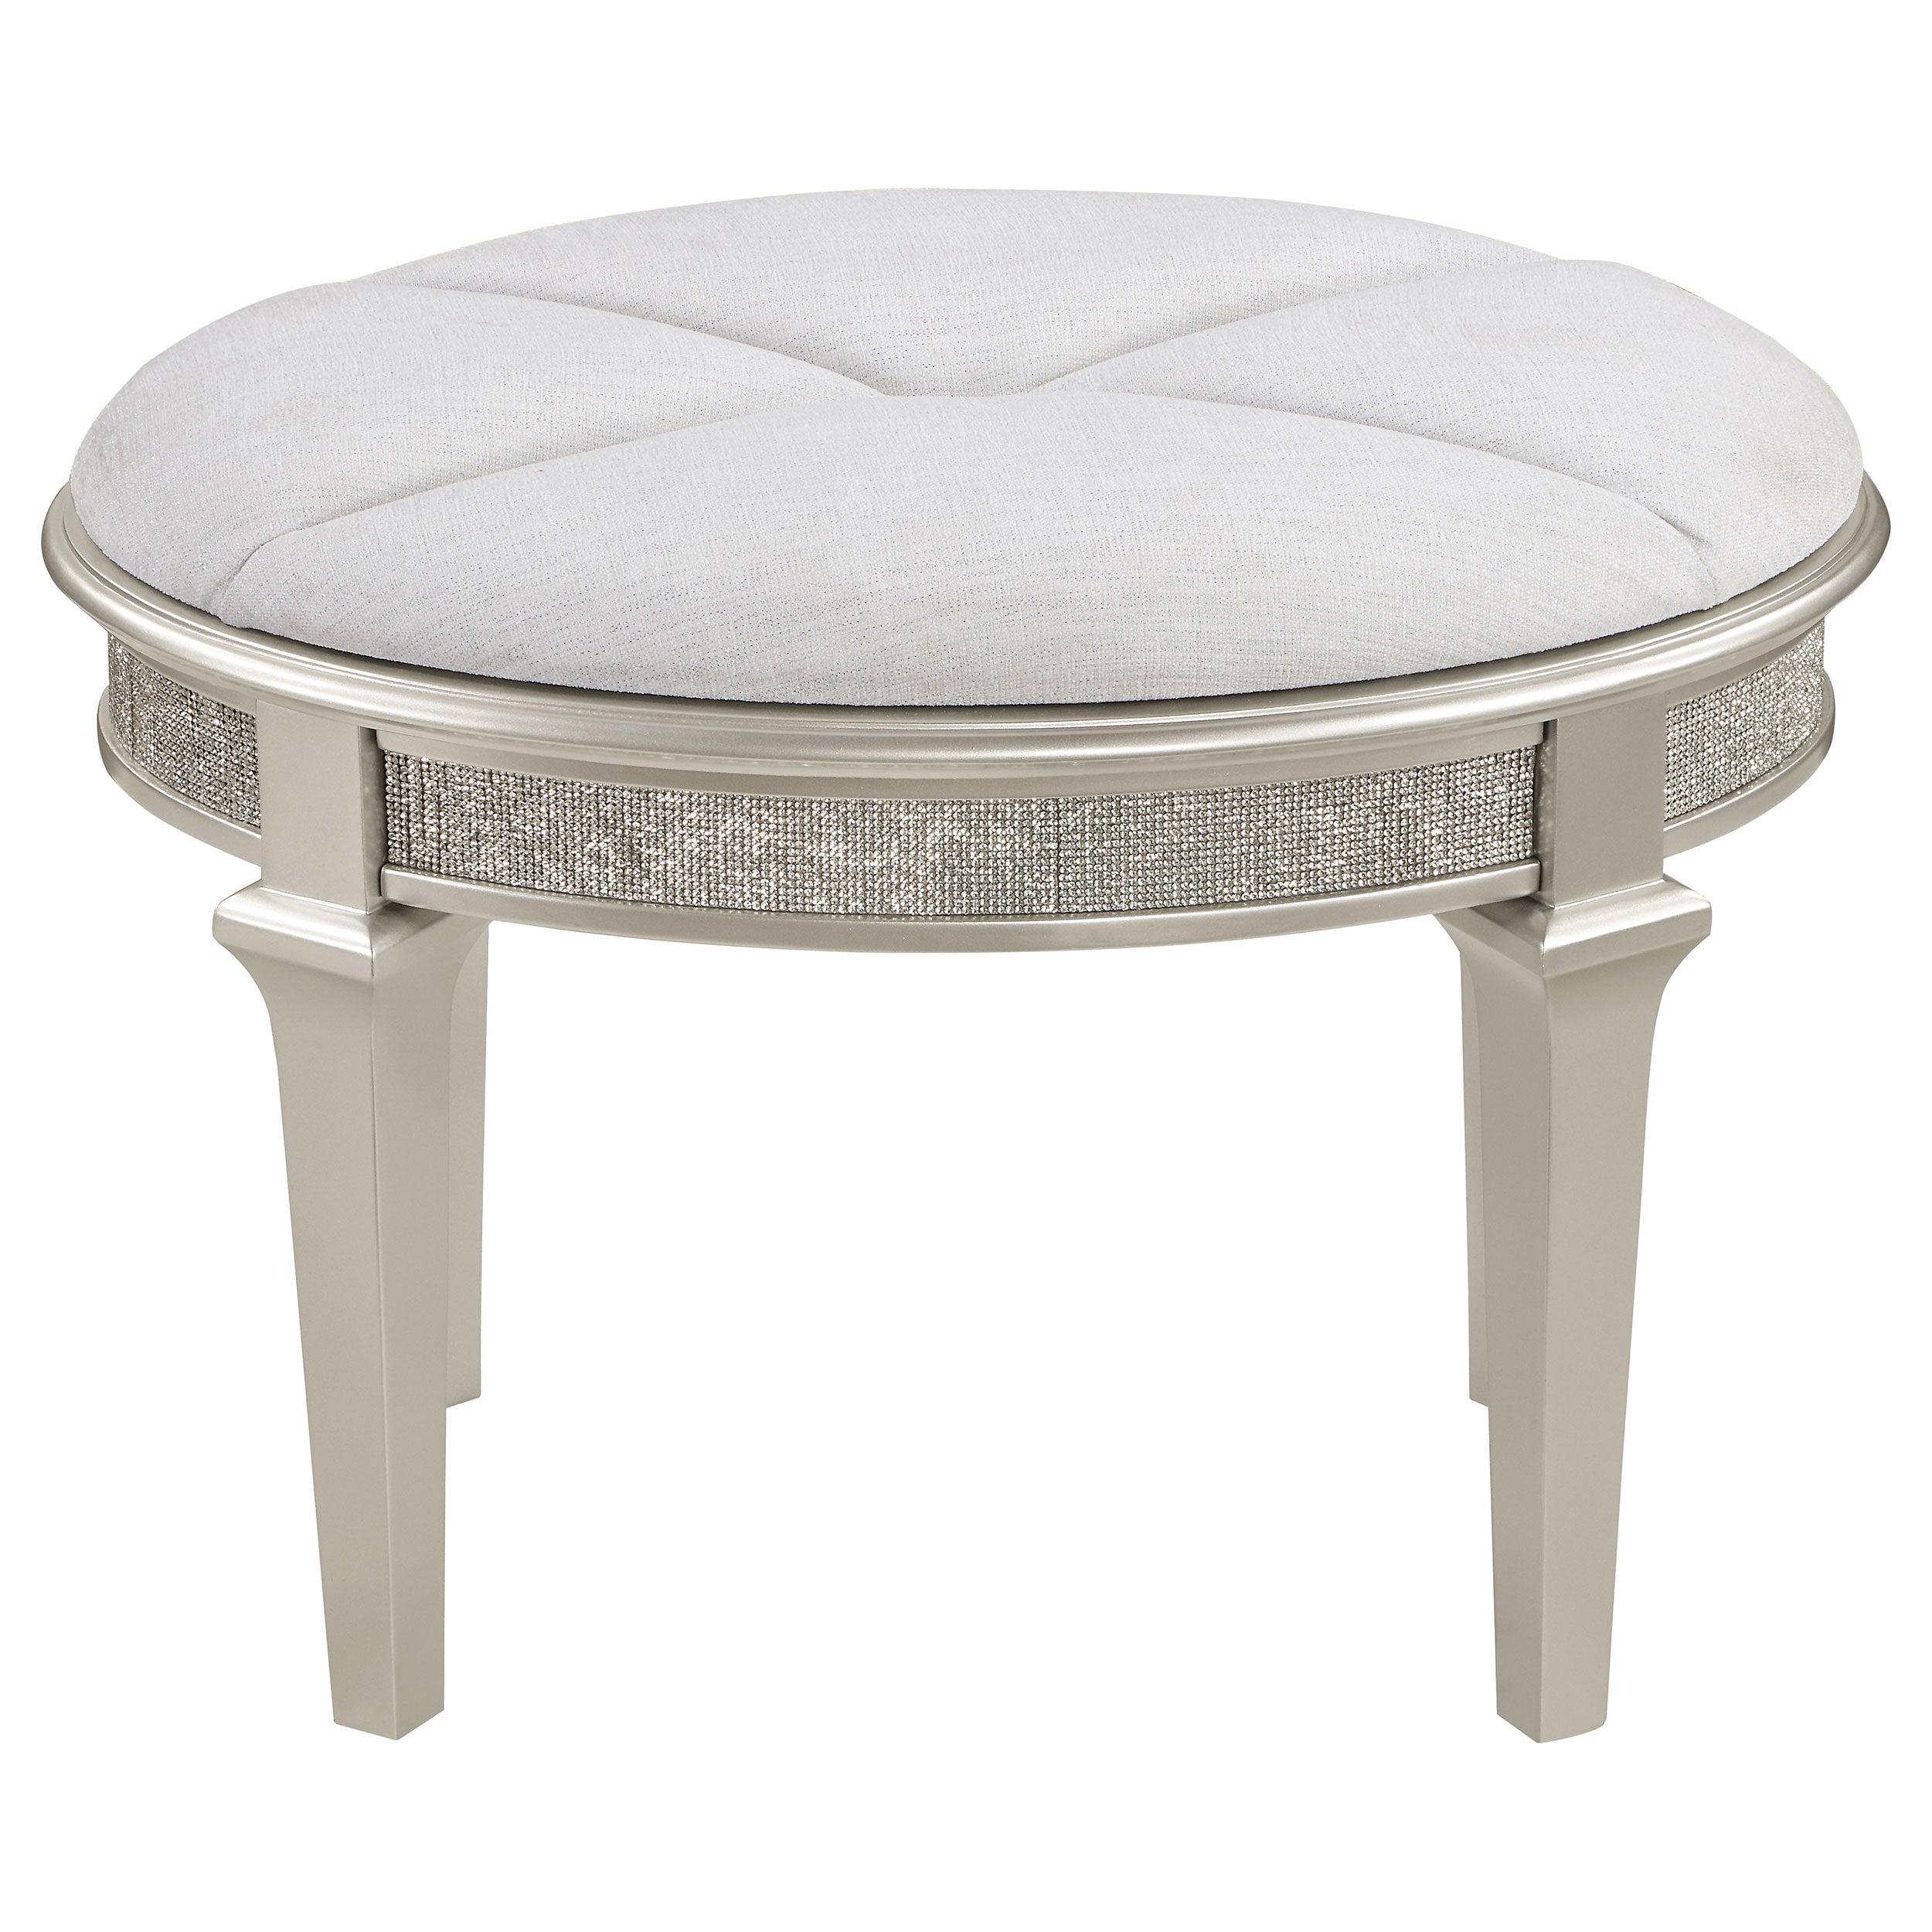 Evangeline Oval Vanity Stool with Faux Diamond Trim Silver and Ivory